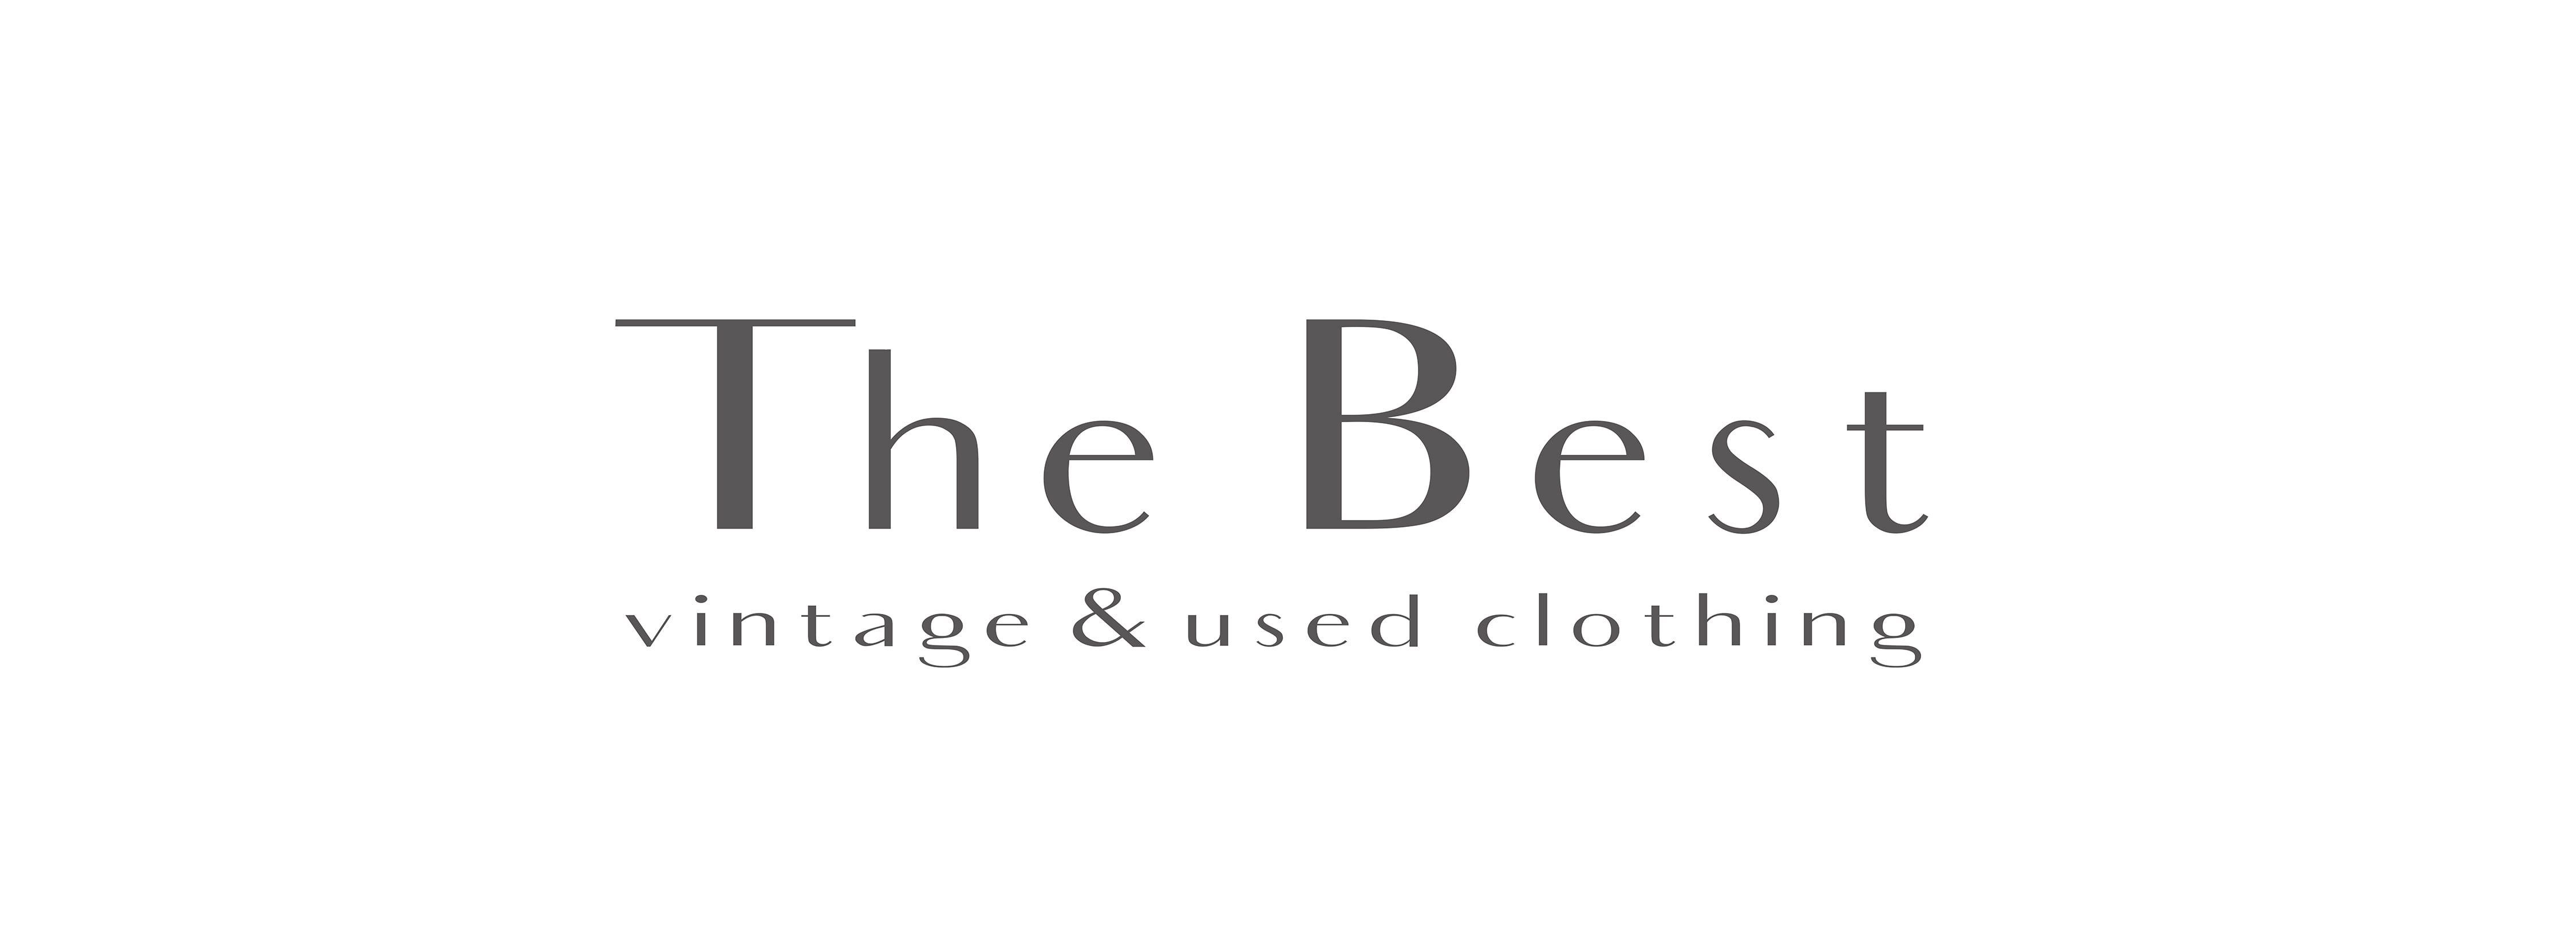 The Best vintage & used clothing